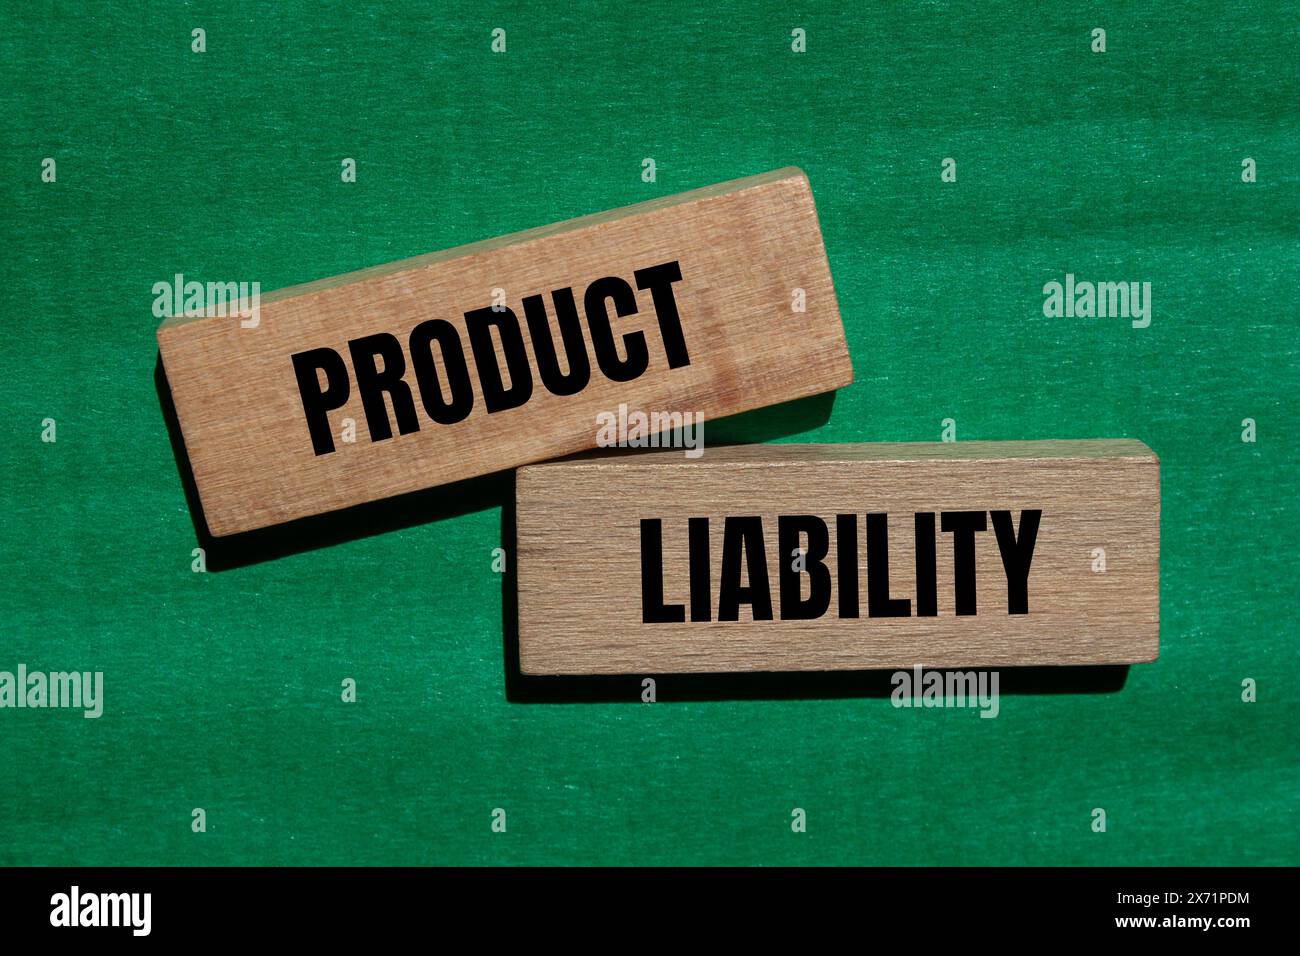 Product liability words written on wooden blocks with green background. Conceptual product liability symbol. Copy space. Stock Photo